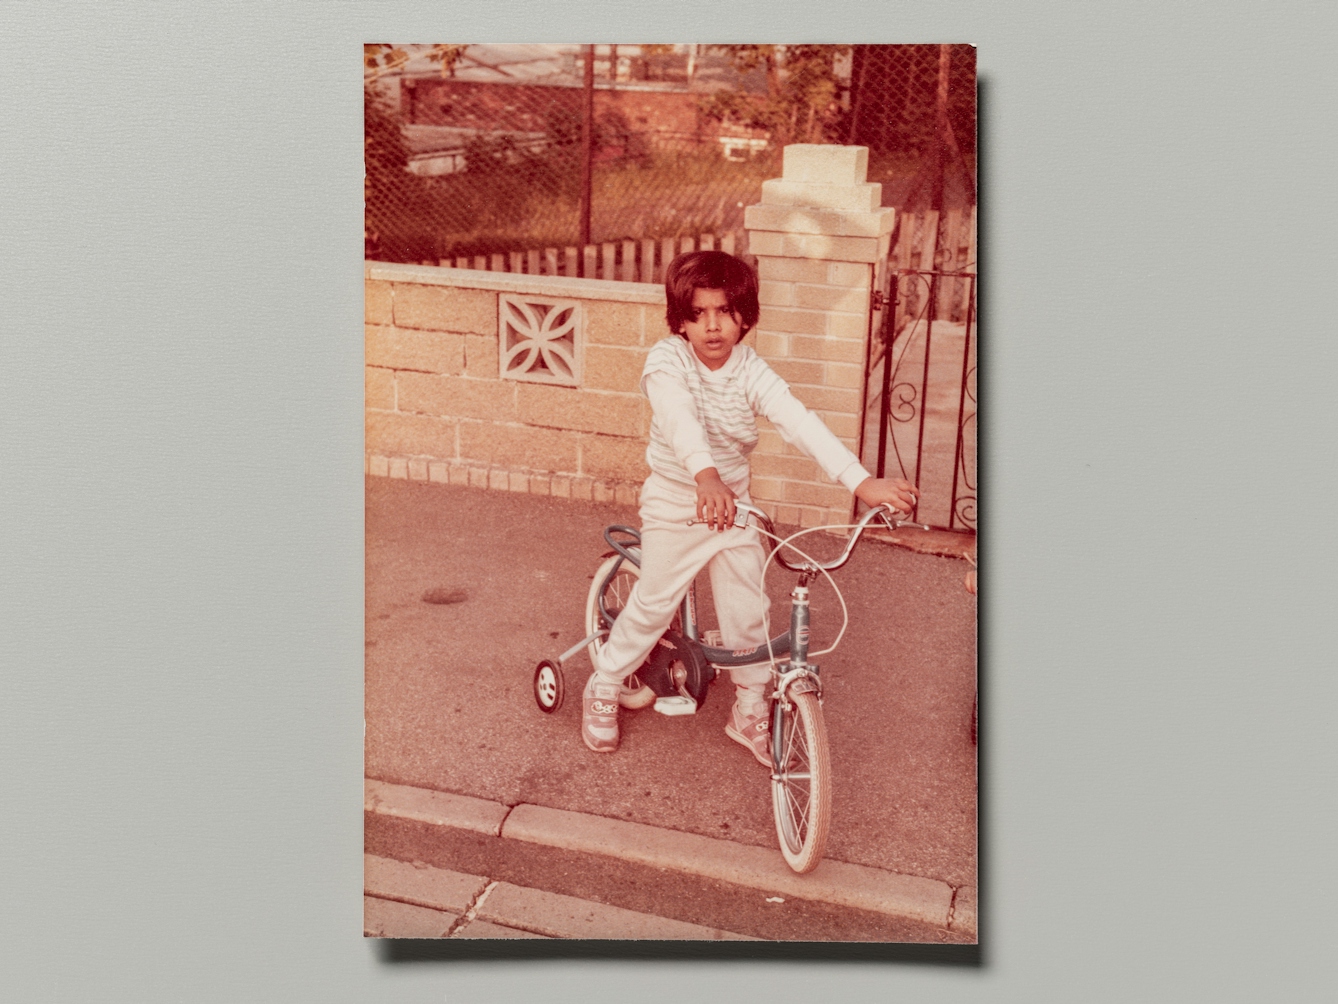 Photograph of a family photographic print resting on a grey background. The photo shows a young girl sat on a bicycle equipped with stabilisers, looking to camera. She is on the pavement of a residential street.